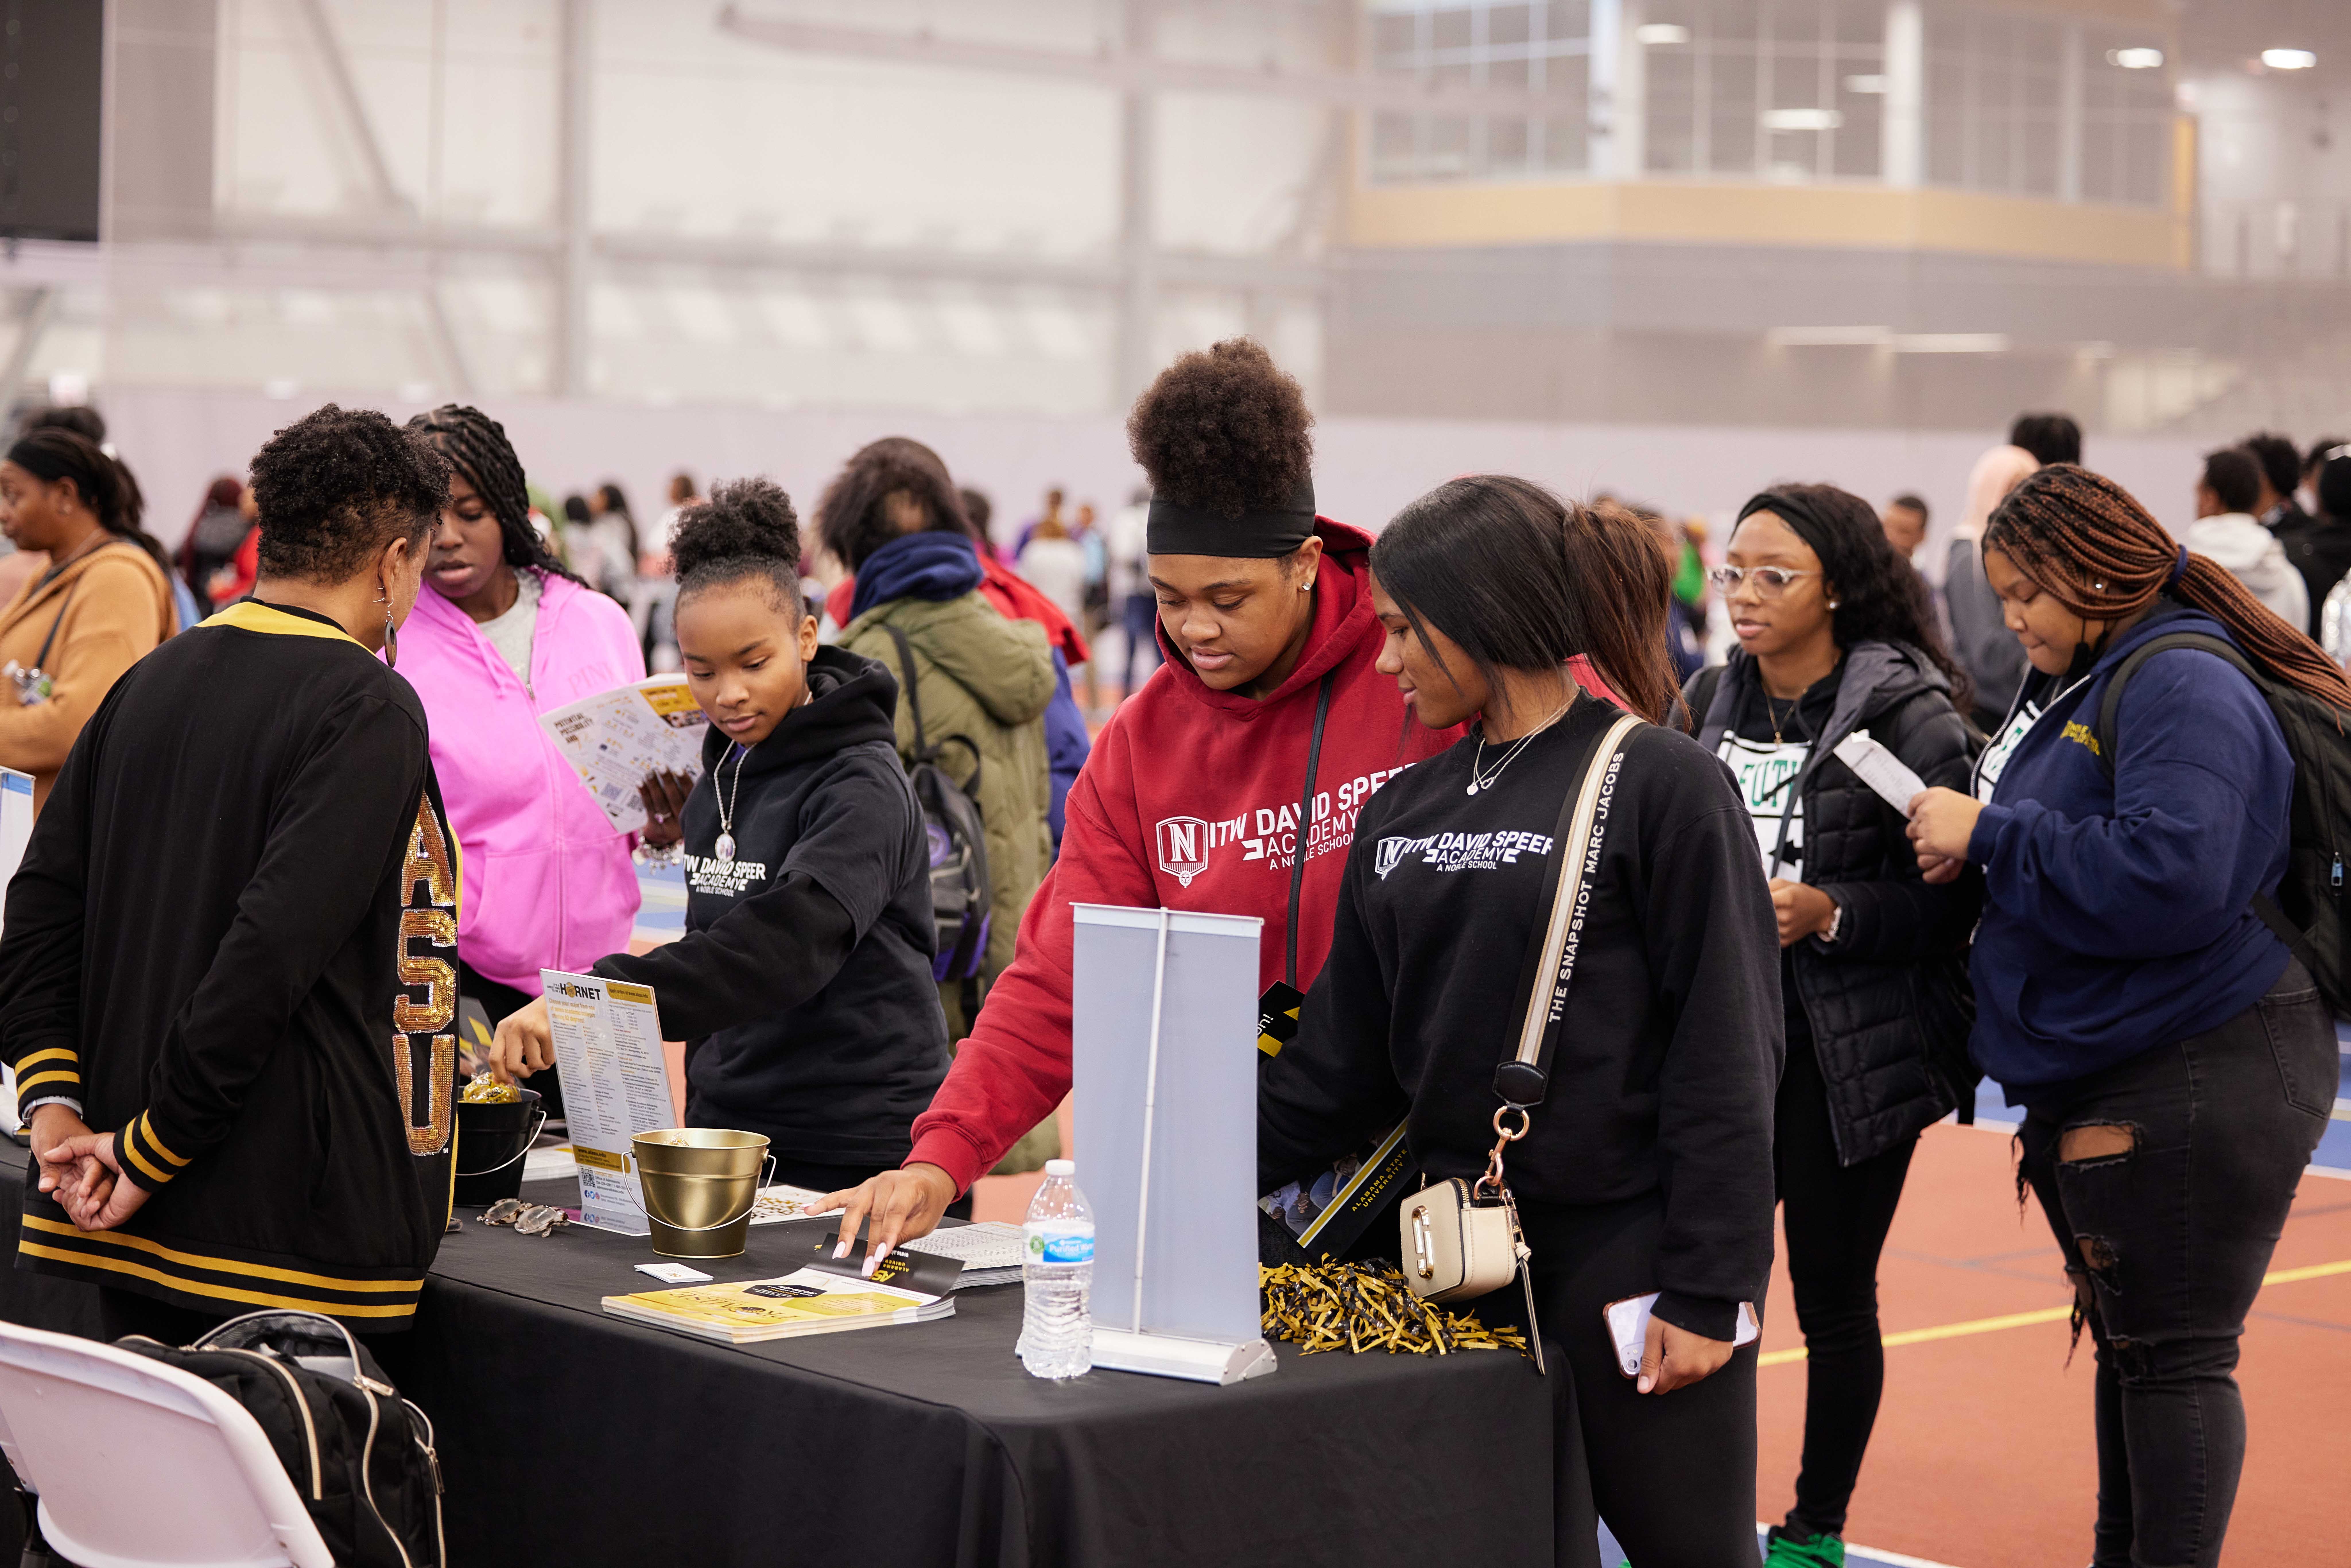 In this photo, you can see a handful of Noble Schools' students from different campuses looking at and grabbing printed flyers and materials at a college recruitment booth for Alabama State University, an HBCU. Behind them, you can see several other students wandering around a large indoor track field, visiting other HBCU college booths. The students most in the foreground of this photo are wearing ITW David Speer Academy sweatshirts.